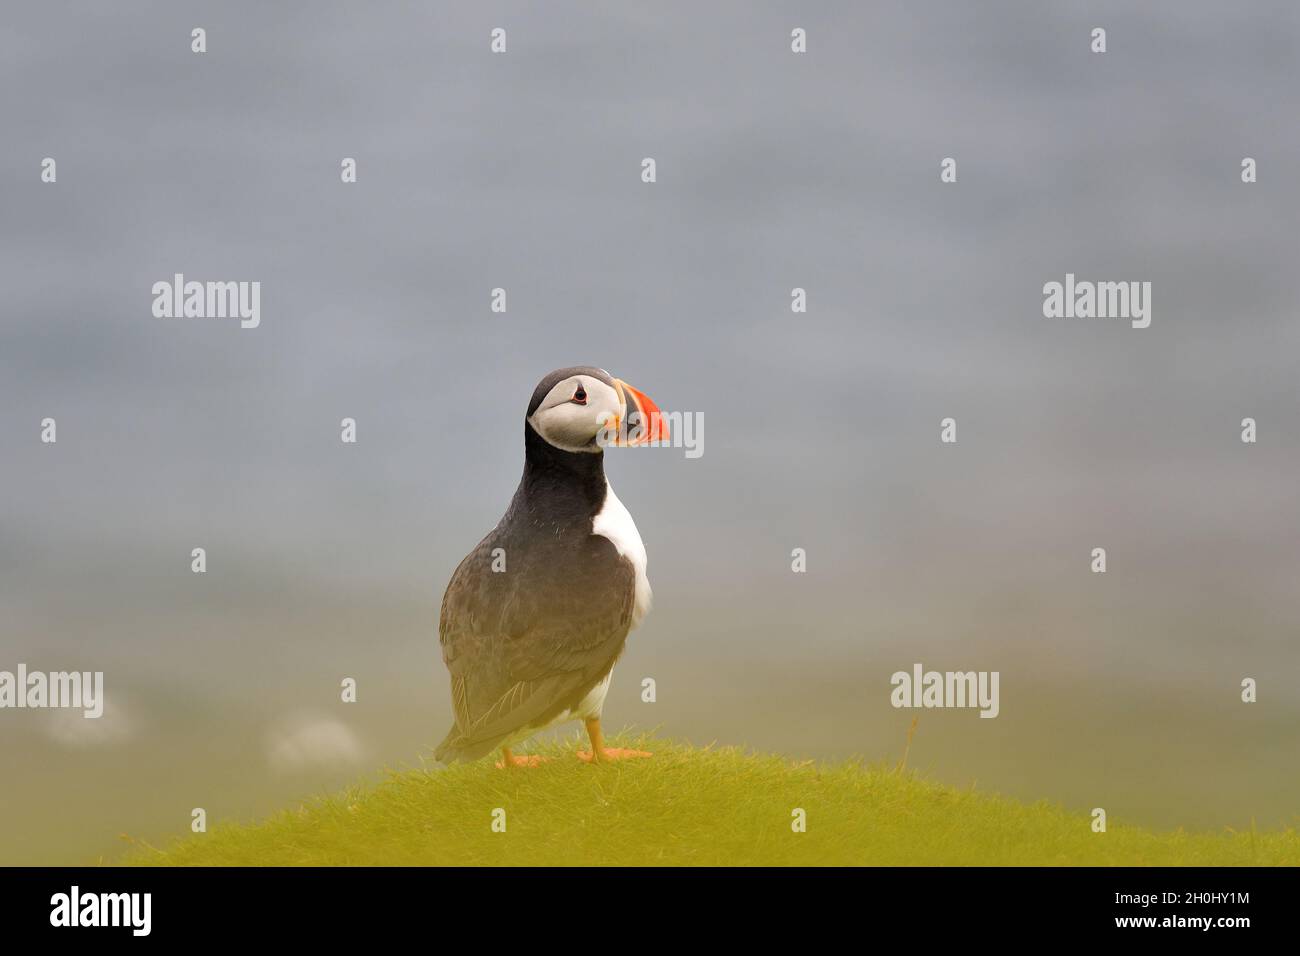 Puffin on the hill, Iceland. Puffin in Westman Islands. Atlantic puffin. Puffin with ocean background. Stock Photo